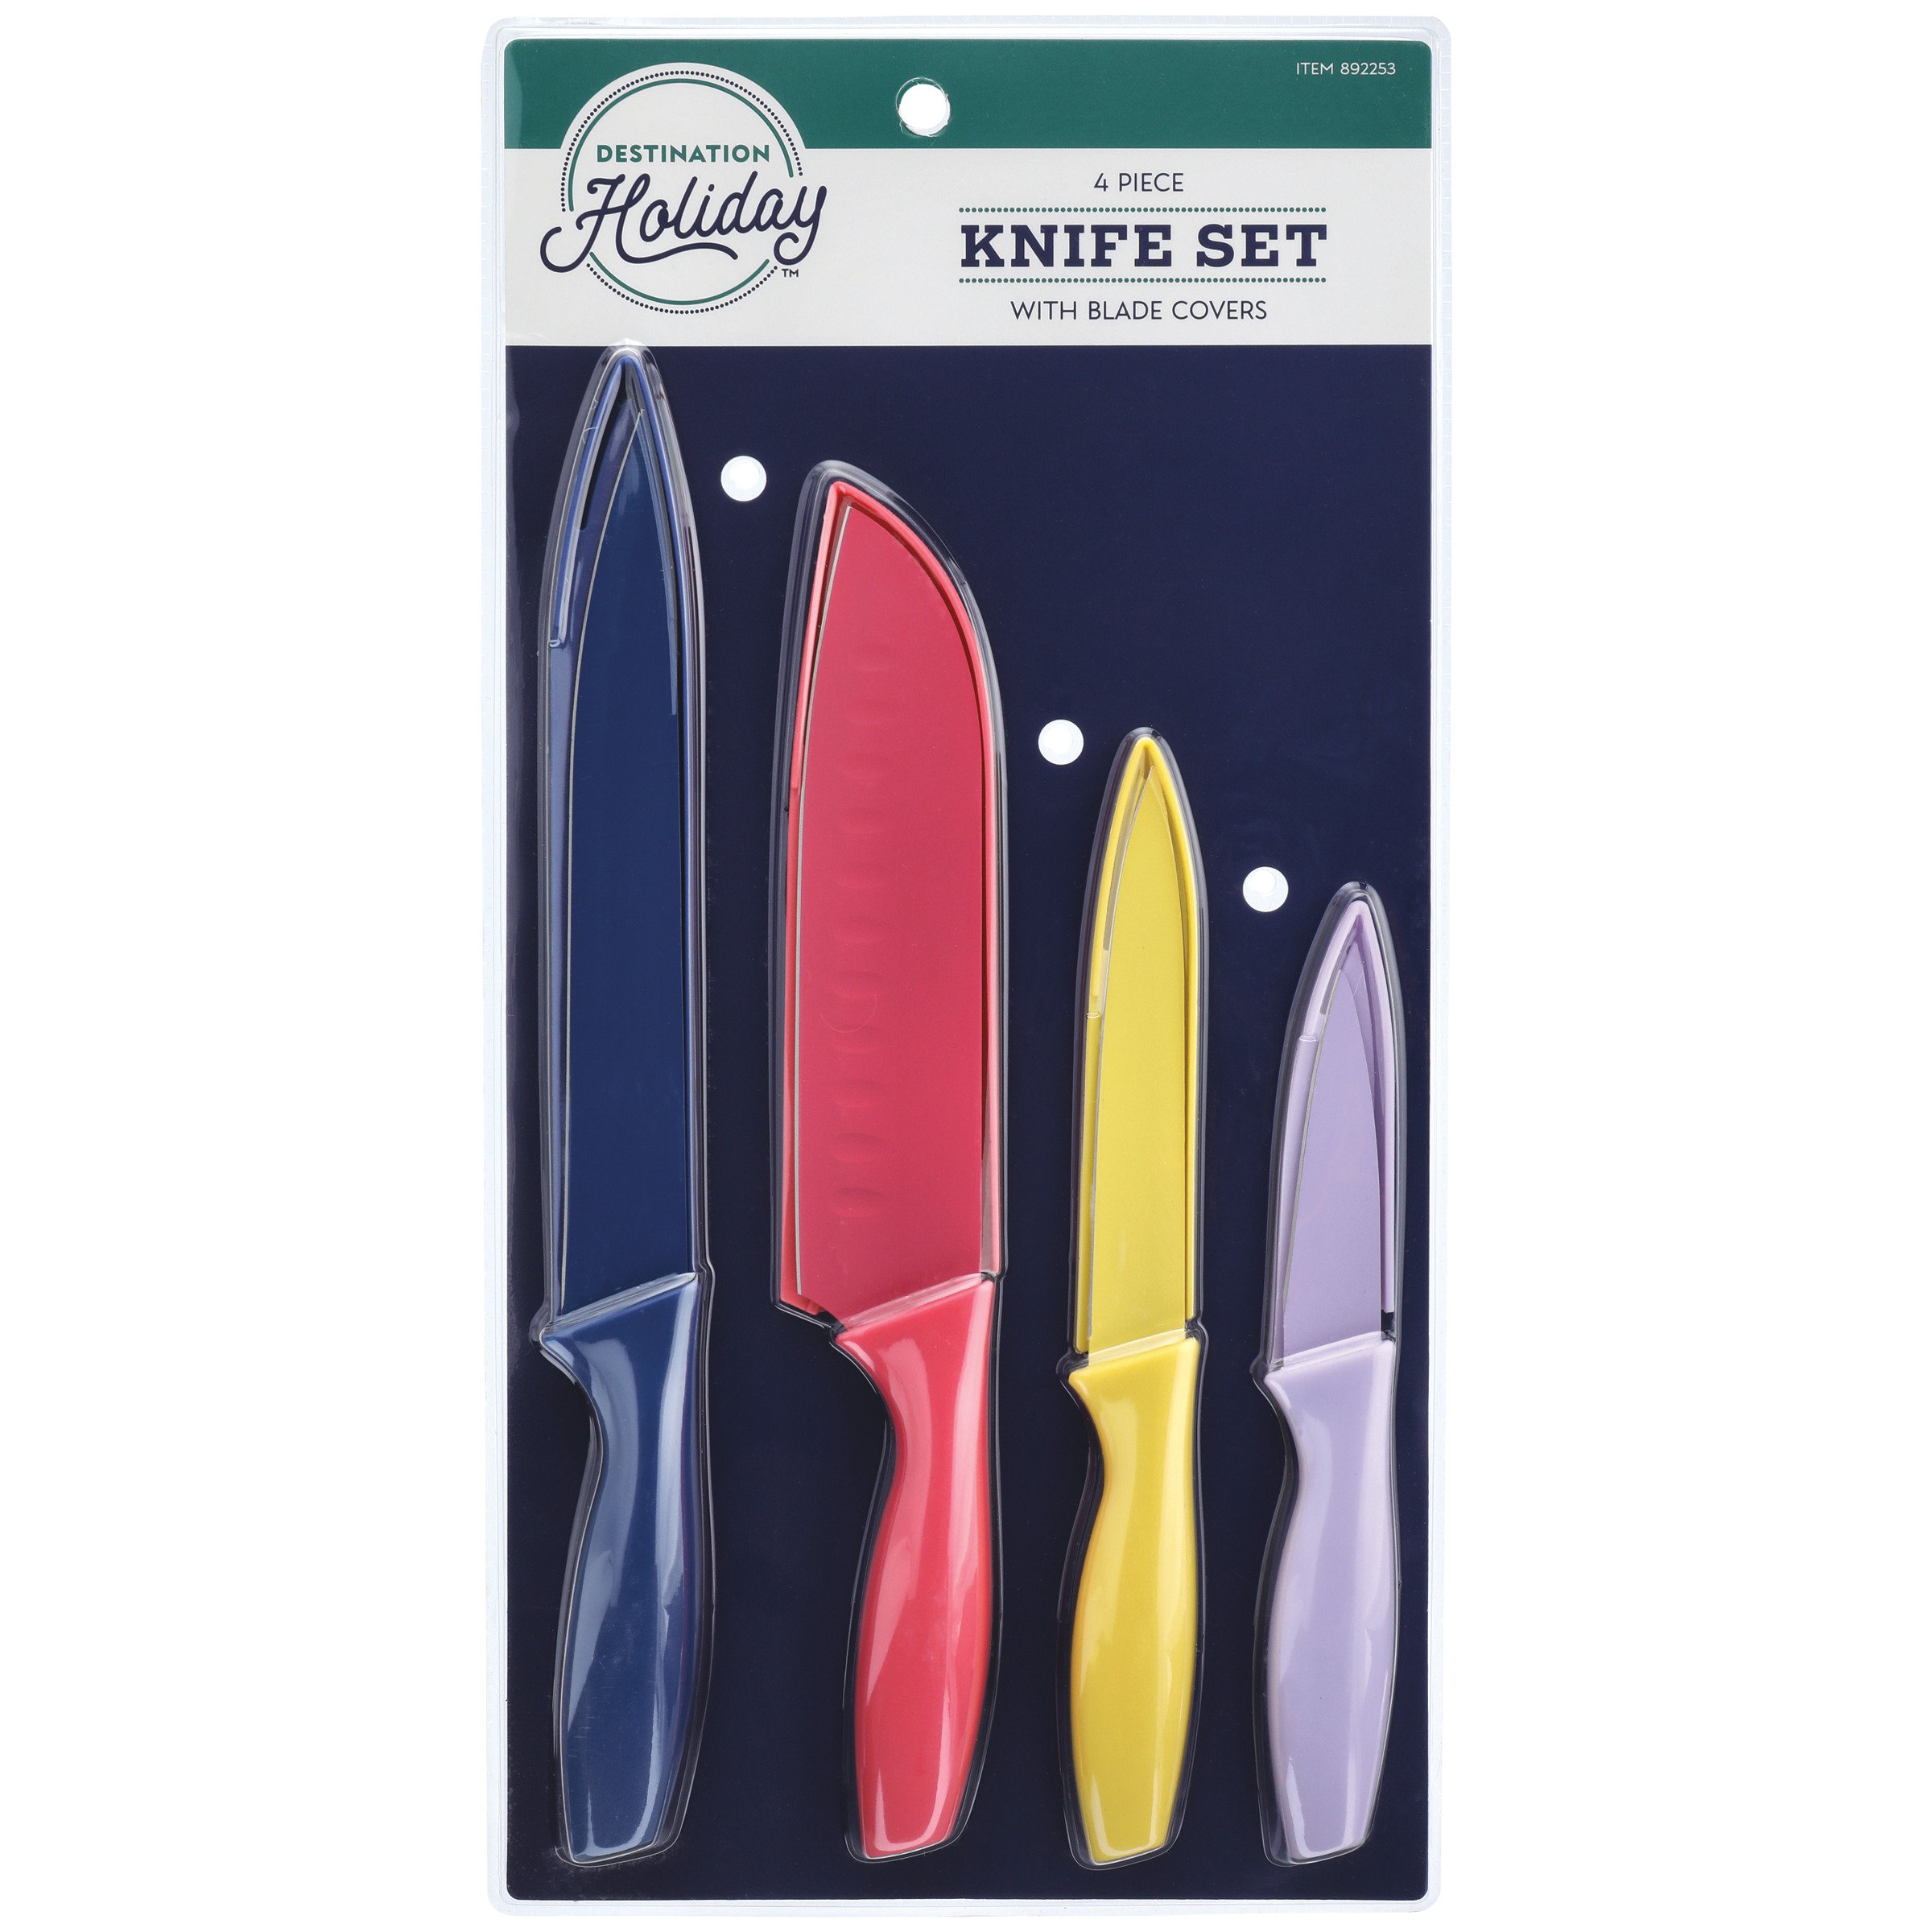 This $17 color-coded knife set with blade covers is perfect for summer